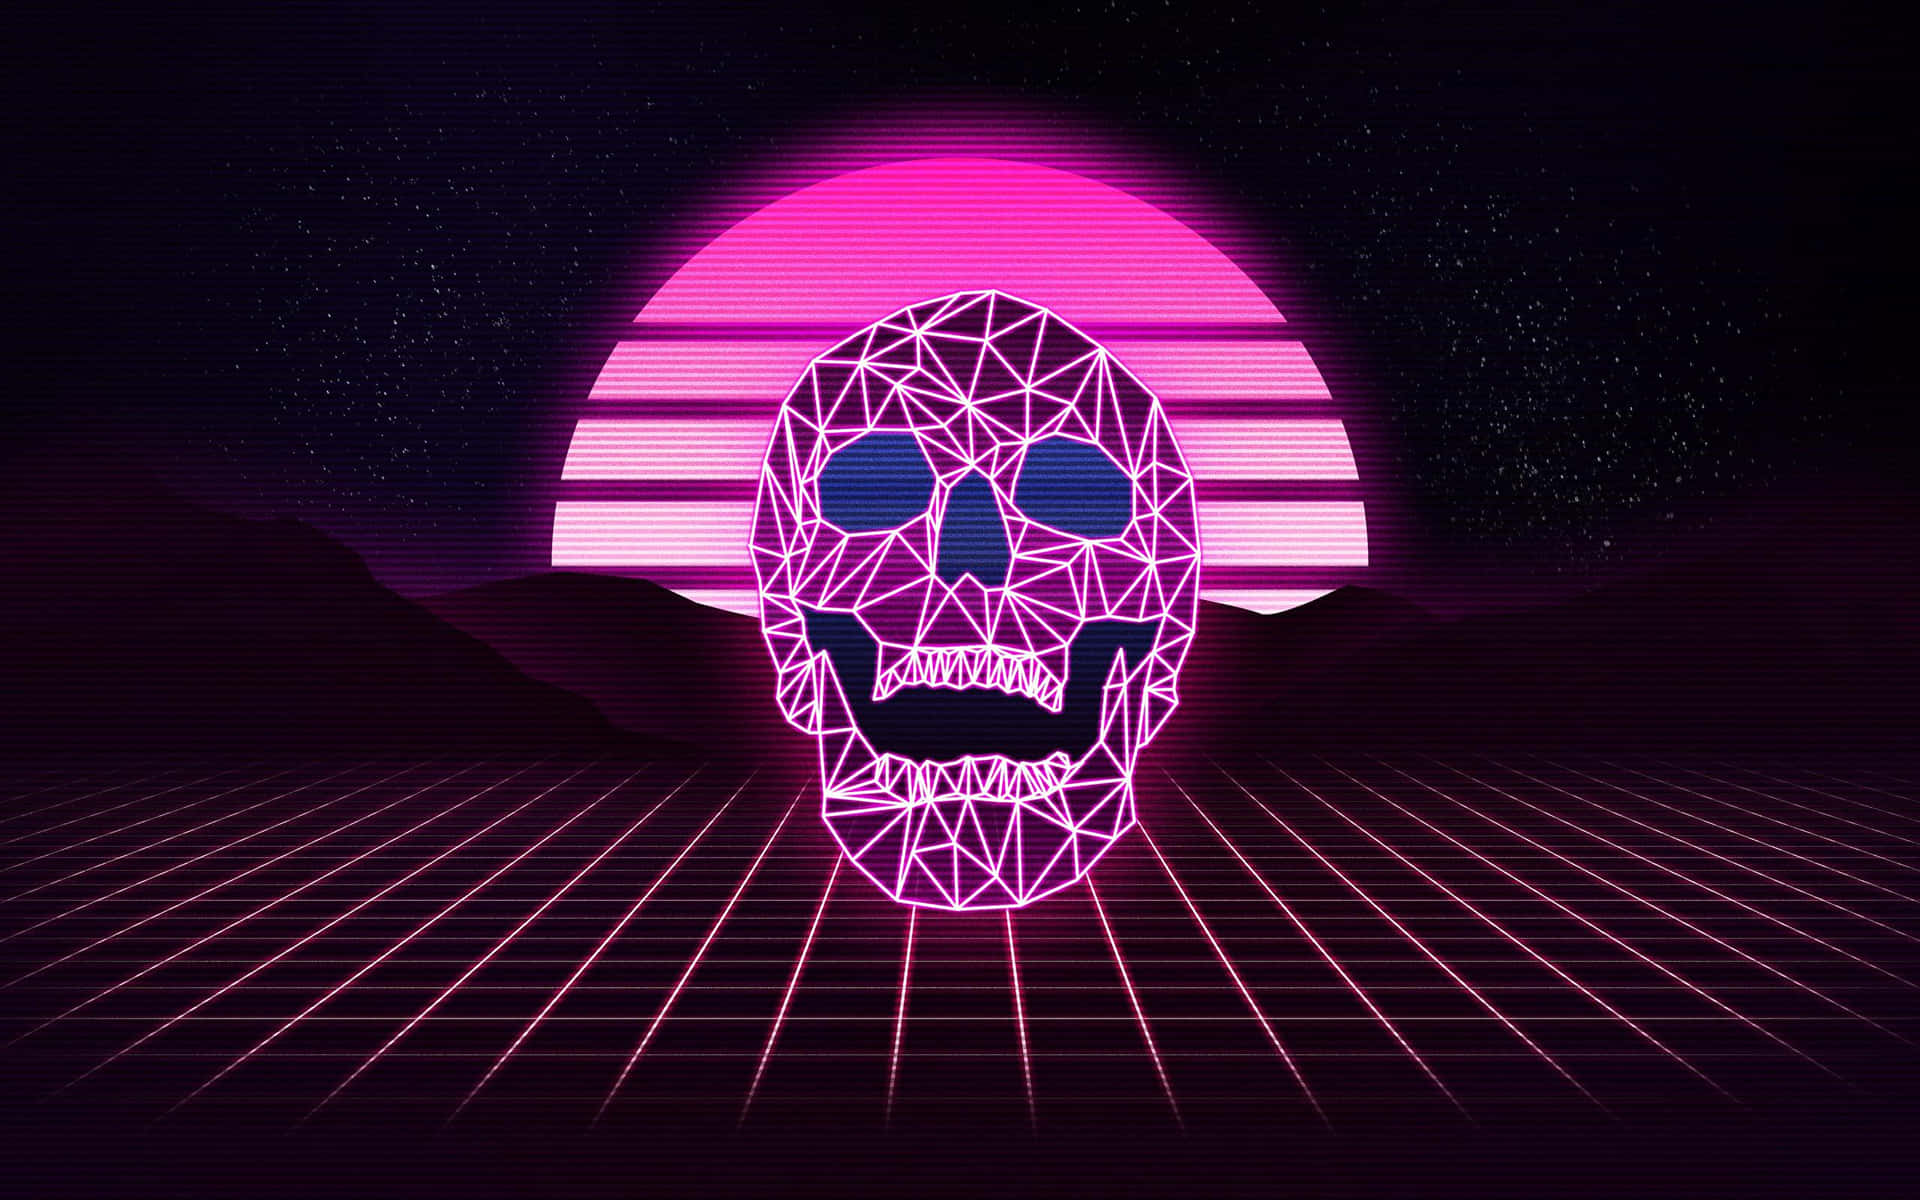 Synthwave backdrop transports you to the 80s